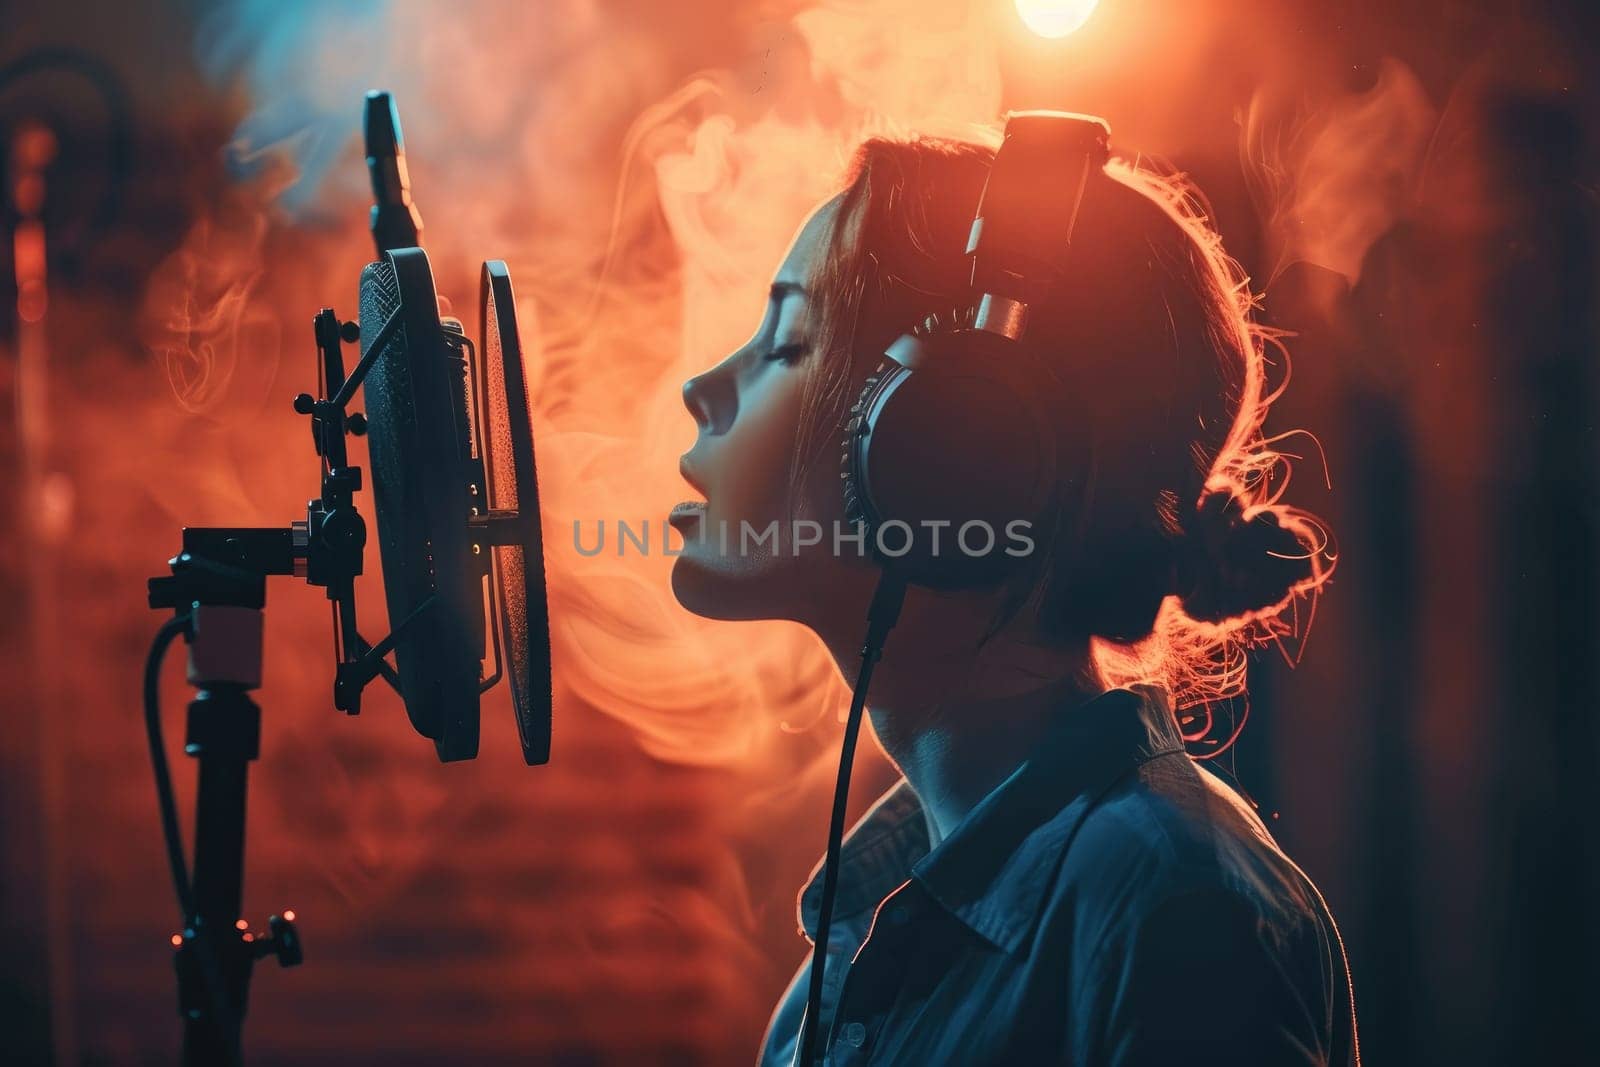 A singer wearing headphones belts out a powerful note in a soundproof vocal booth